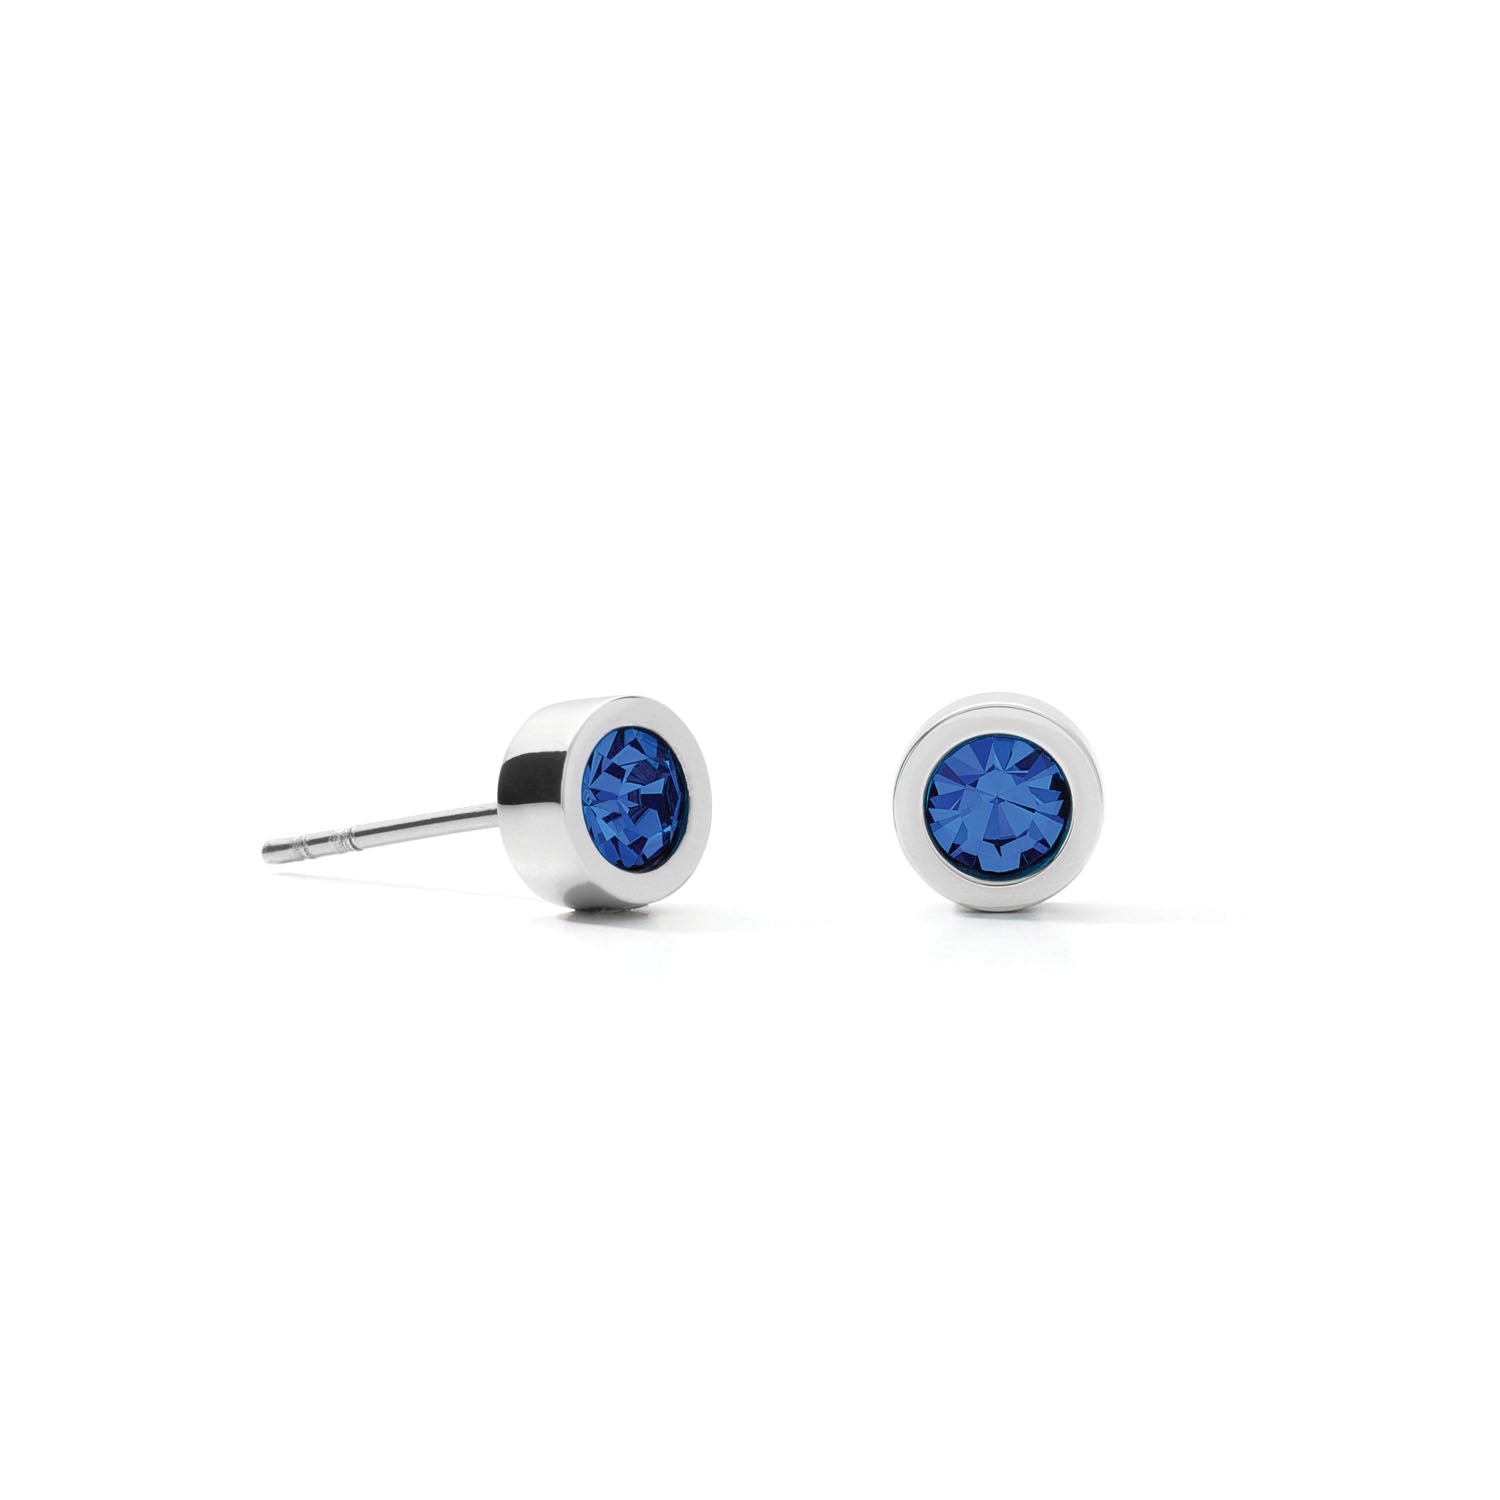 Stud Earrings with Crystals 0228/21_0717 - Royal Blue